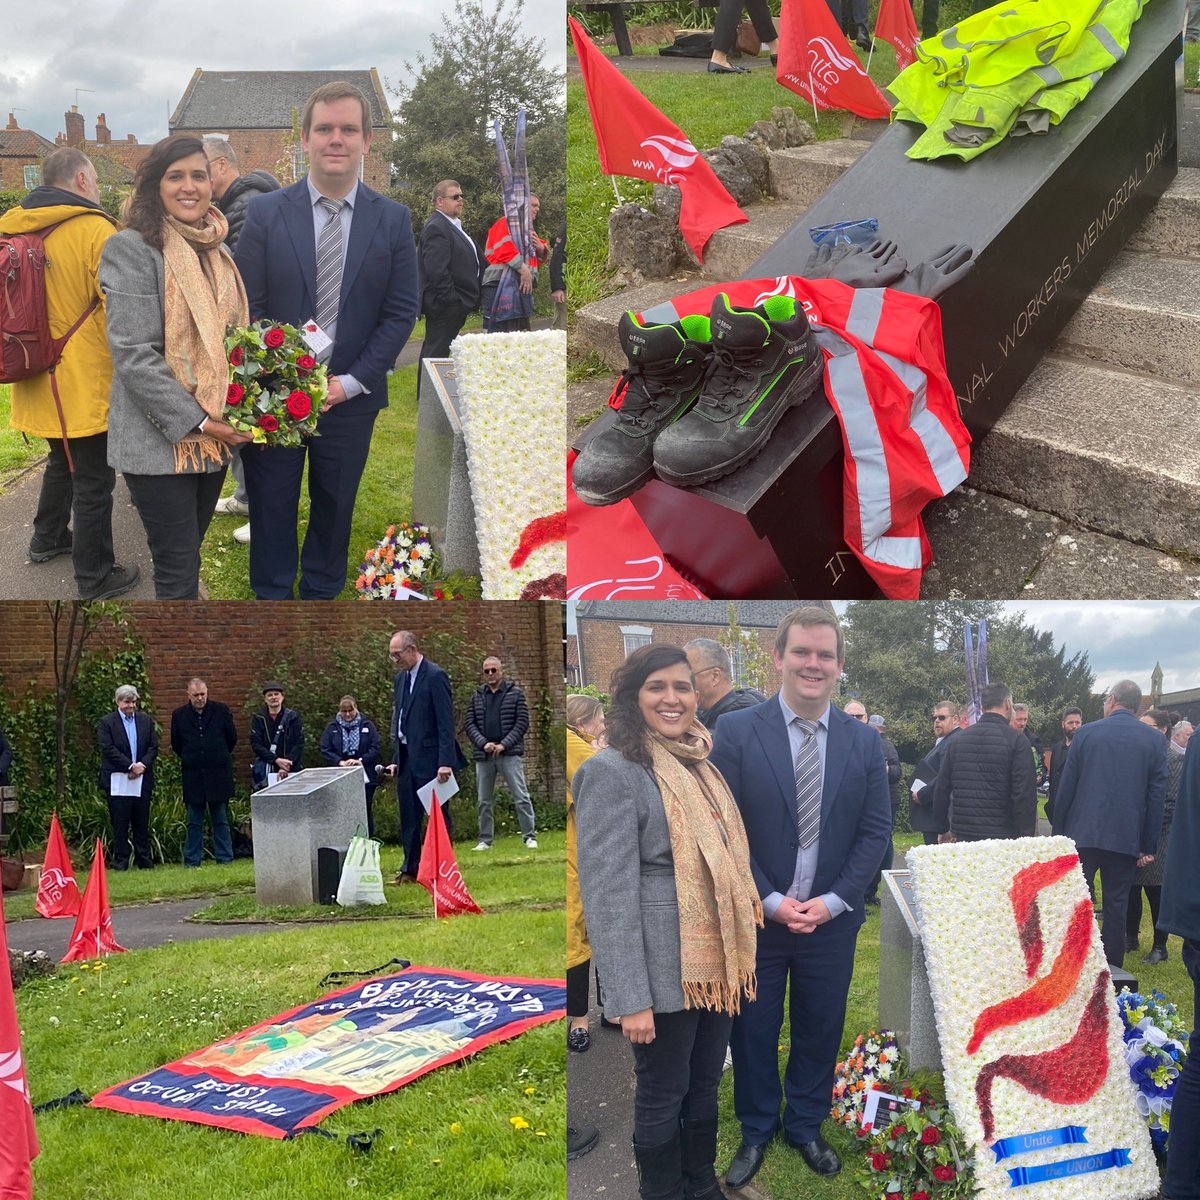 Heartbreaking statistics at the International Workers Memorial Day in Bridgwater organised by @unitetheunion today. We will continue to fight for the living and remember the dead. @ThompsonsLaw @cathclad @VeritySaber